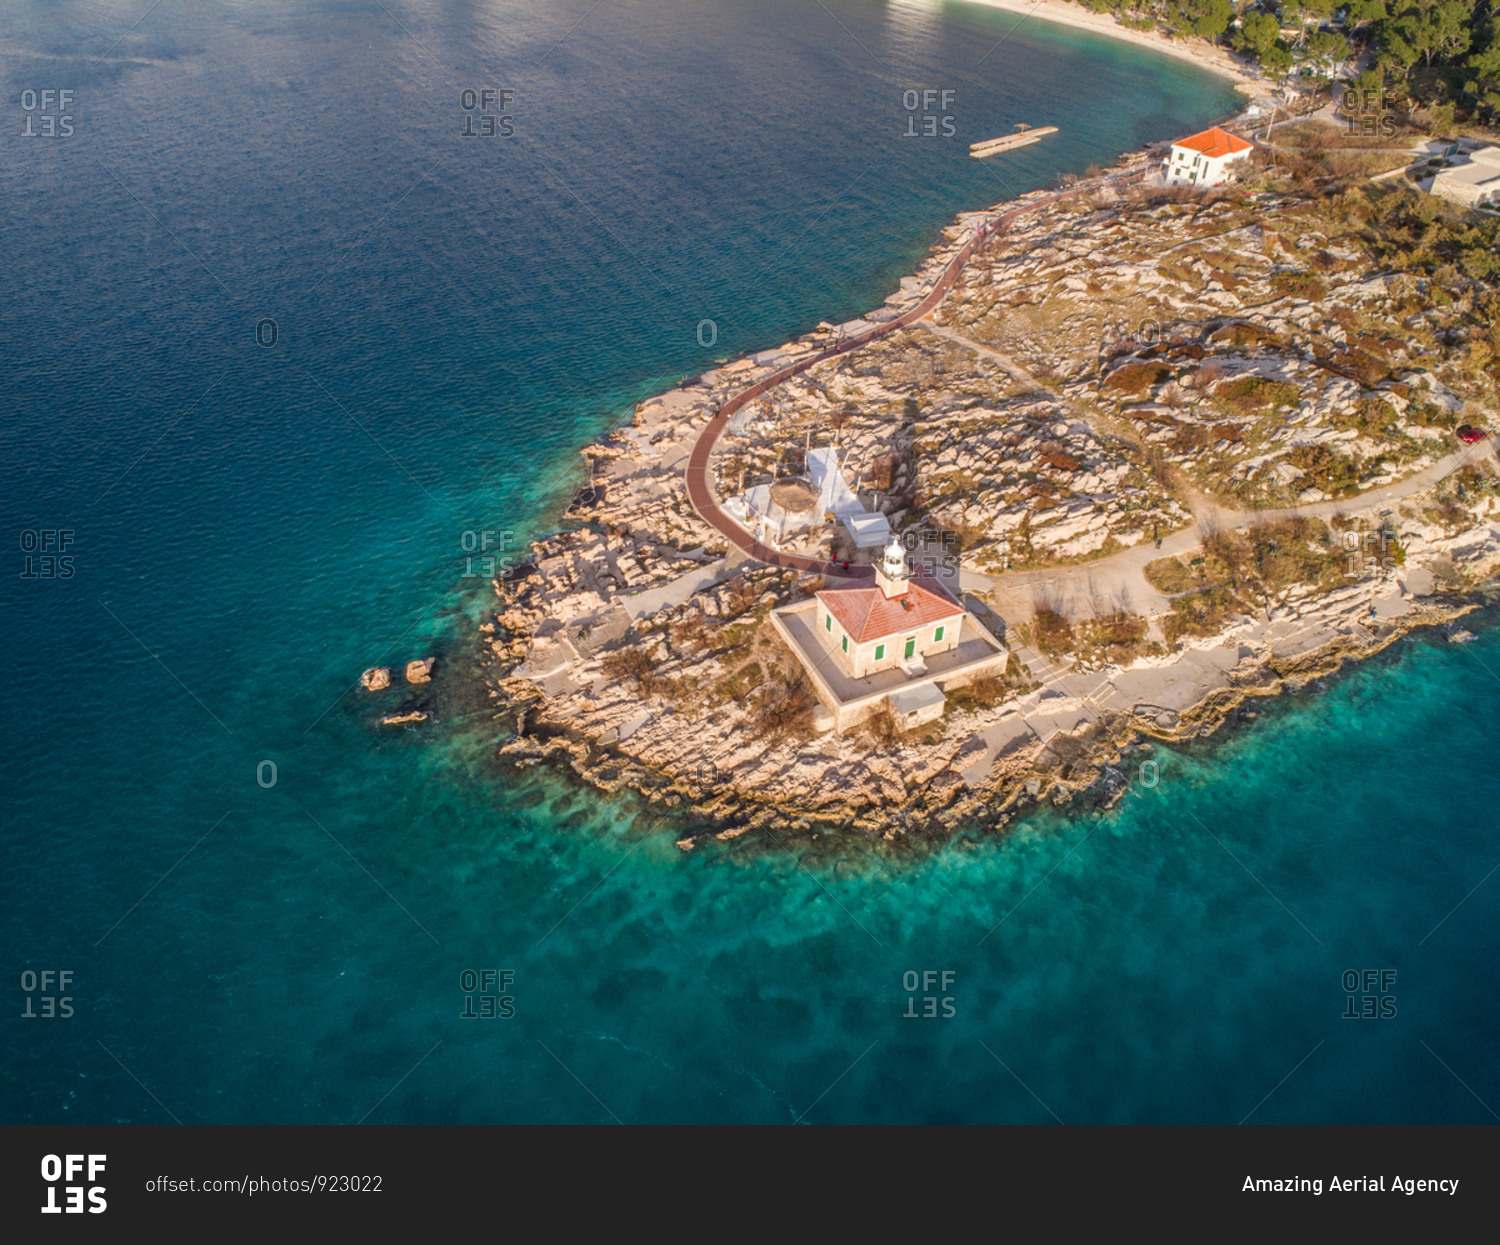 Aerial view of famous lighthouse and Adriatic sea coastline in the city of Makarska in Dalmatia, Croatia. Lighthouse is situated on the St. Peter peninsula.